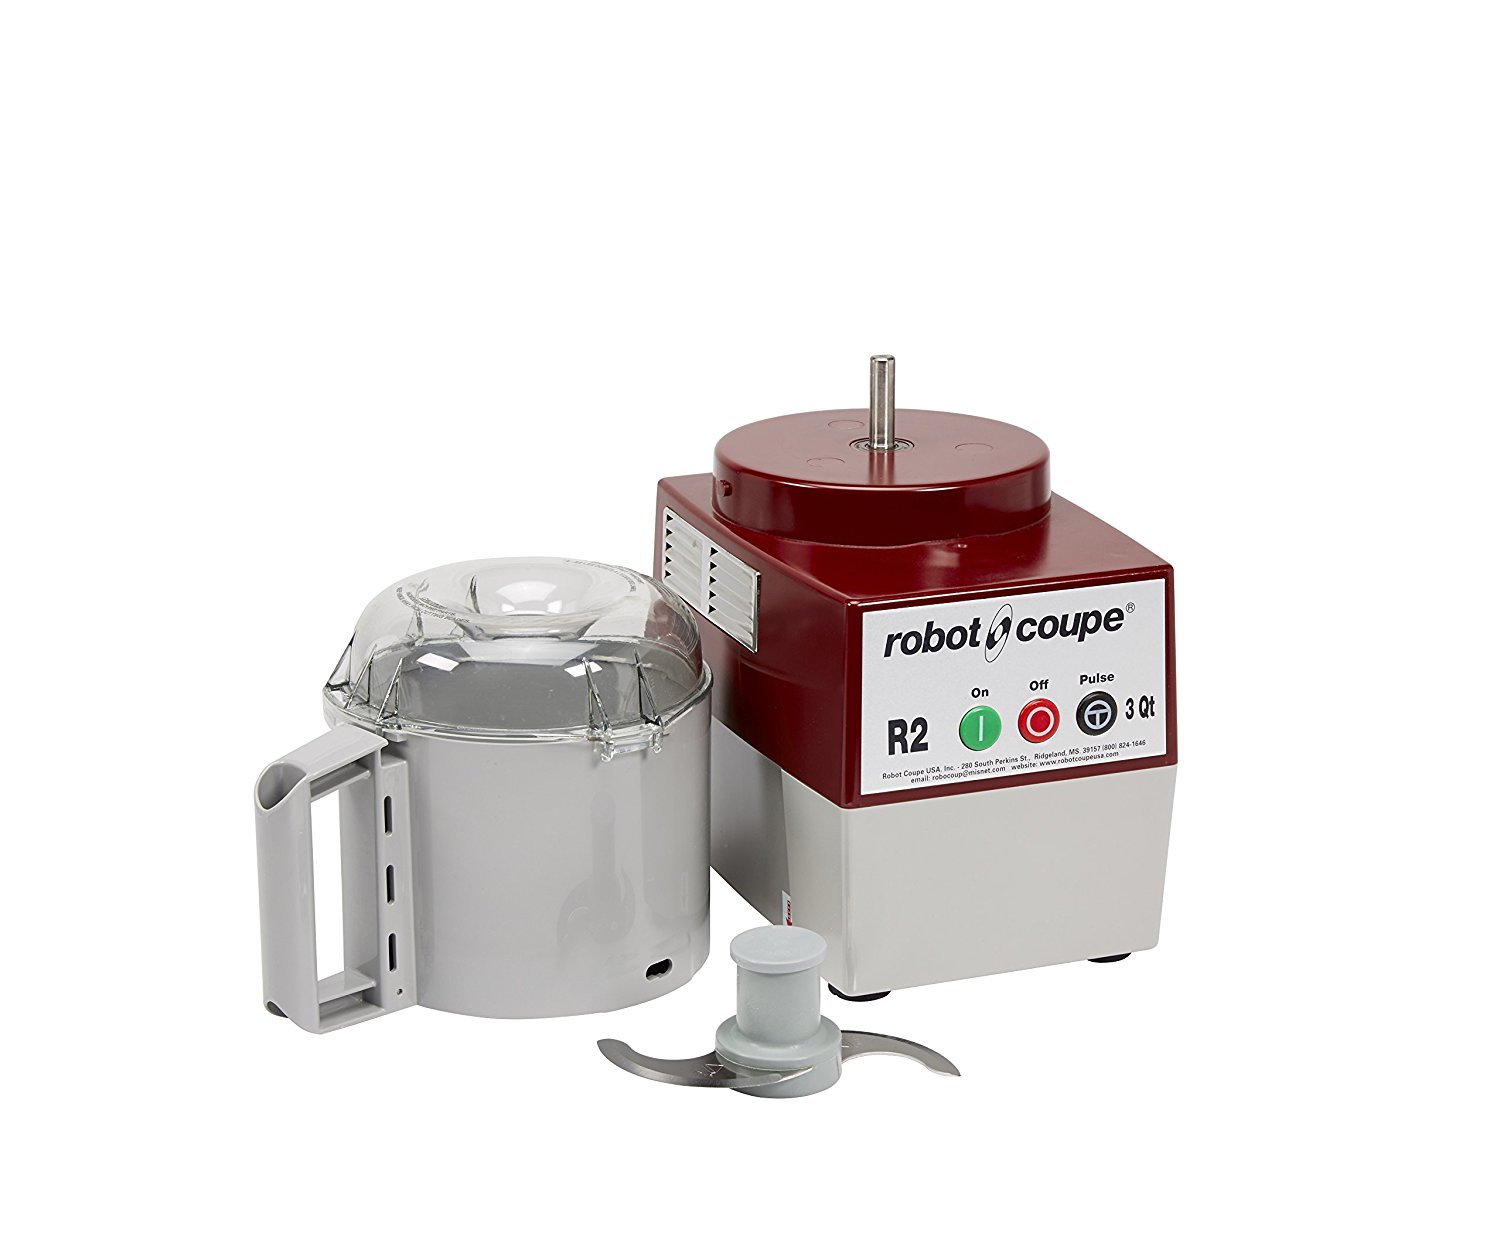 Robot Coupe U.S.A. Commercial Food Processors for Sale